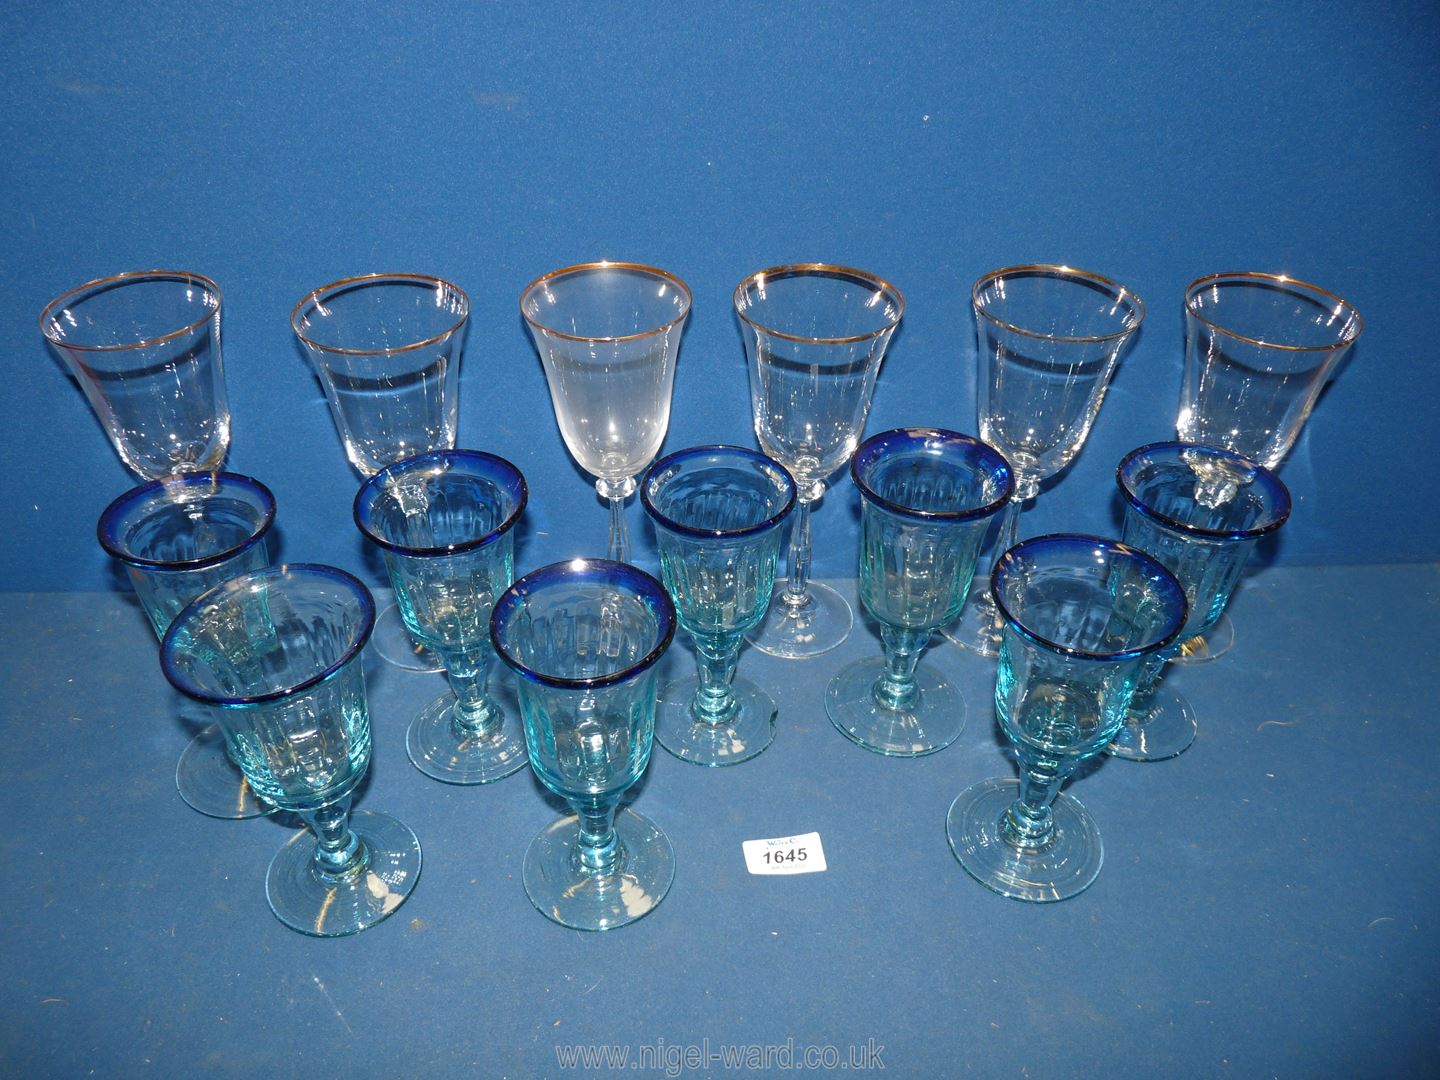 A set of 6 Italian wine glasses with gilt rims and a set of 8 blue wine glasses.